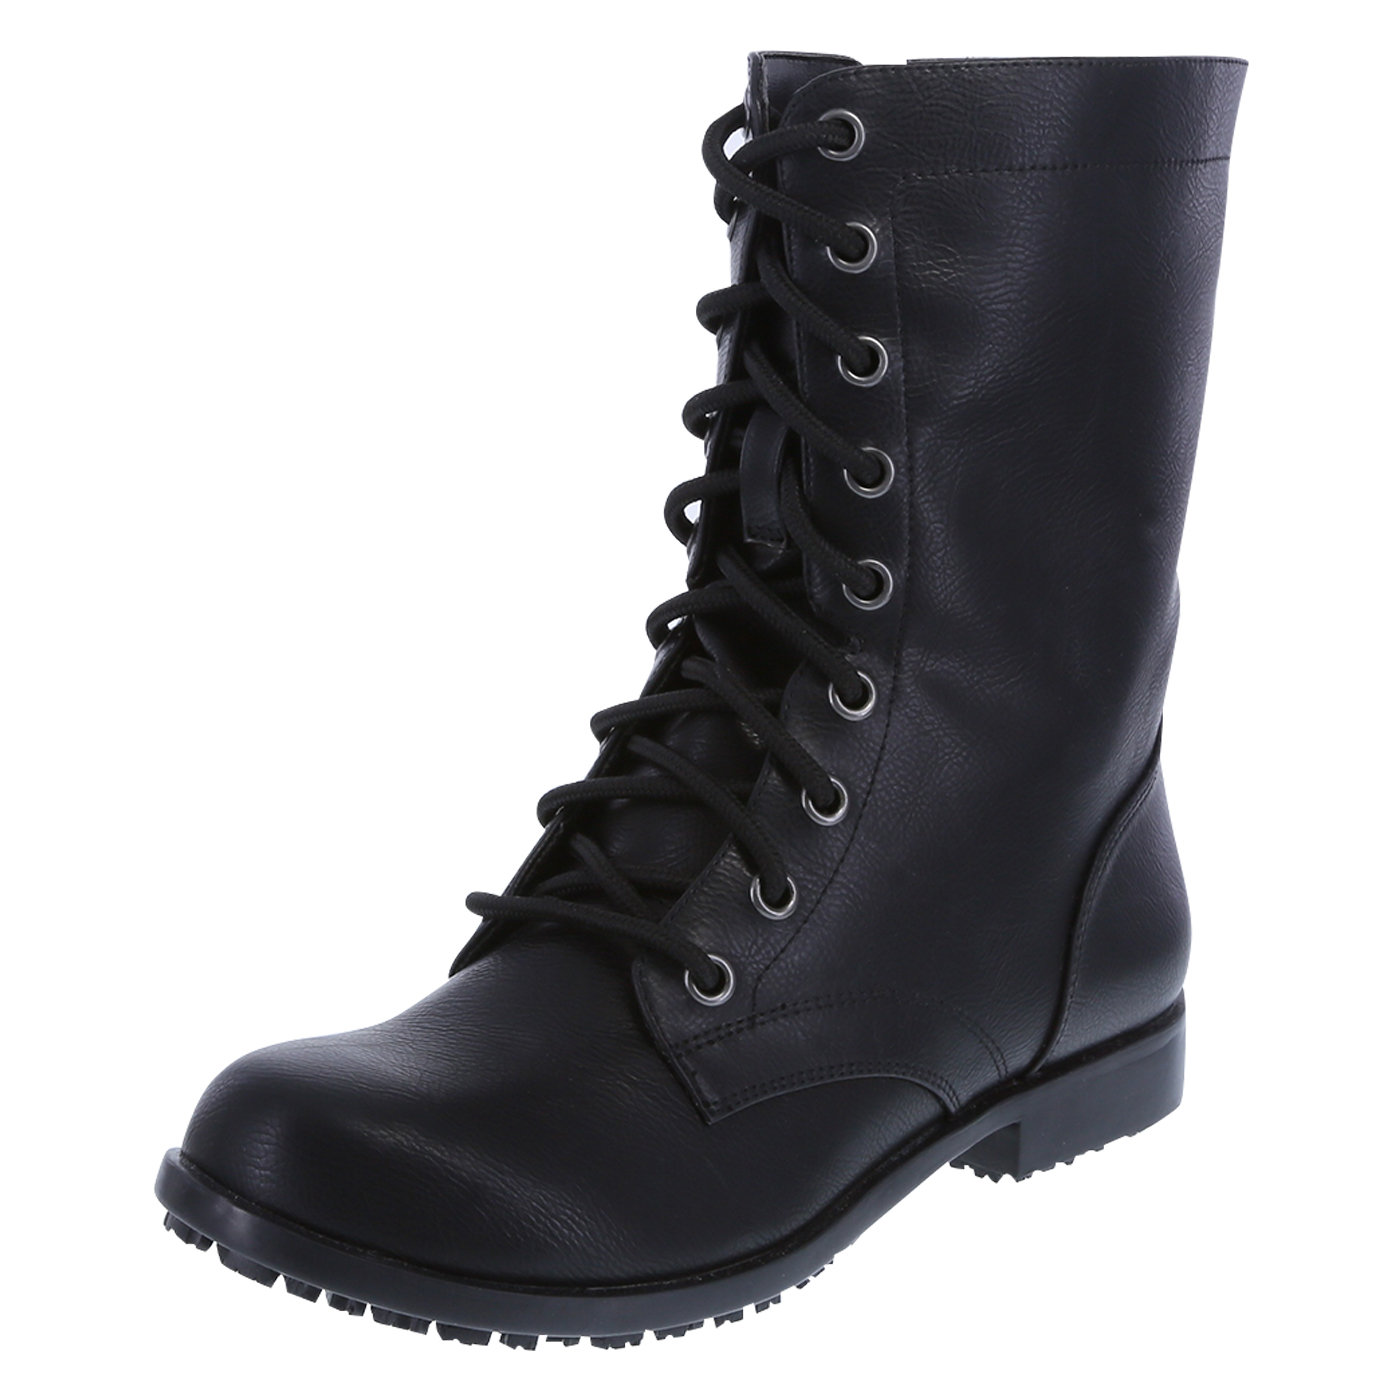 safeTstep Slip-Resistant Women's Boot | Payless